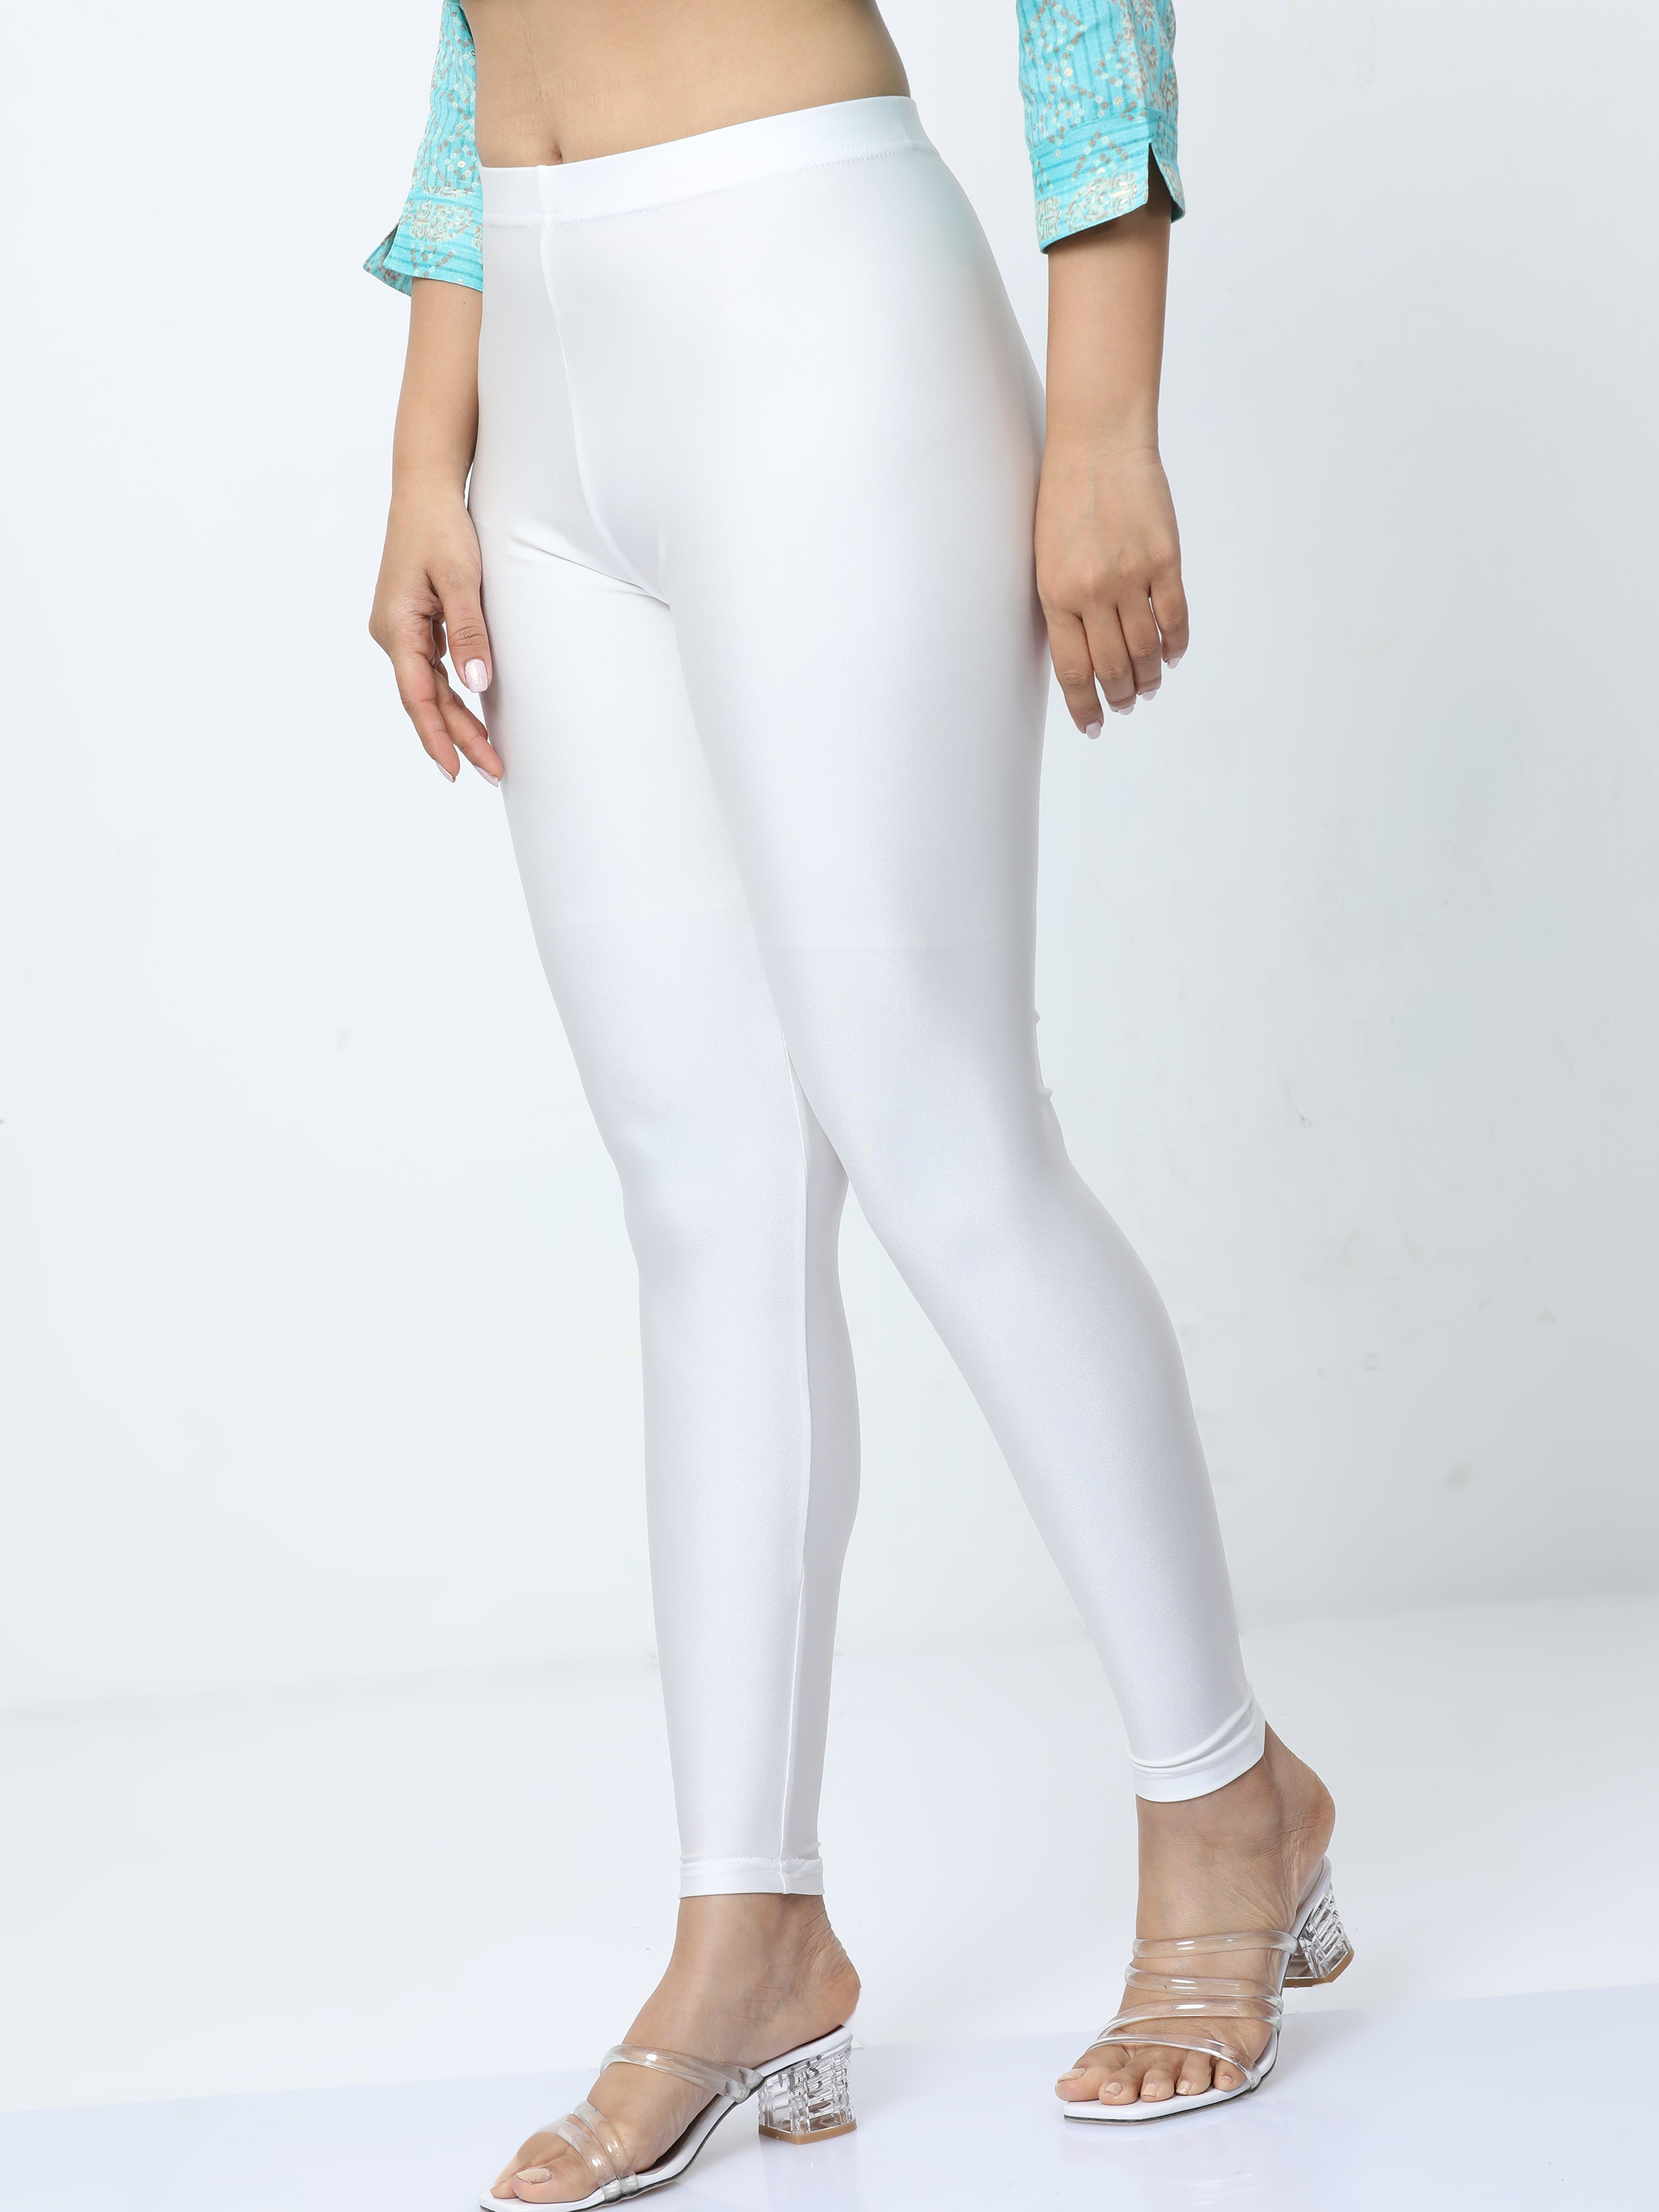 Buy Lili Ultra Super Soft 220 GSM Stretch Bio Wash Ankle Length Leggings  Regular Sizes 20 Plus Solid Colors Pack of 9 Online at Low Prices in India  - Paytmmall.com